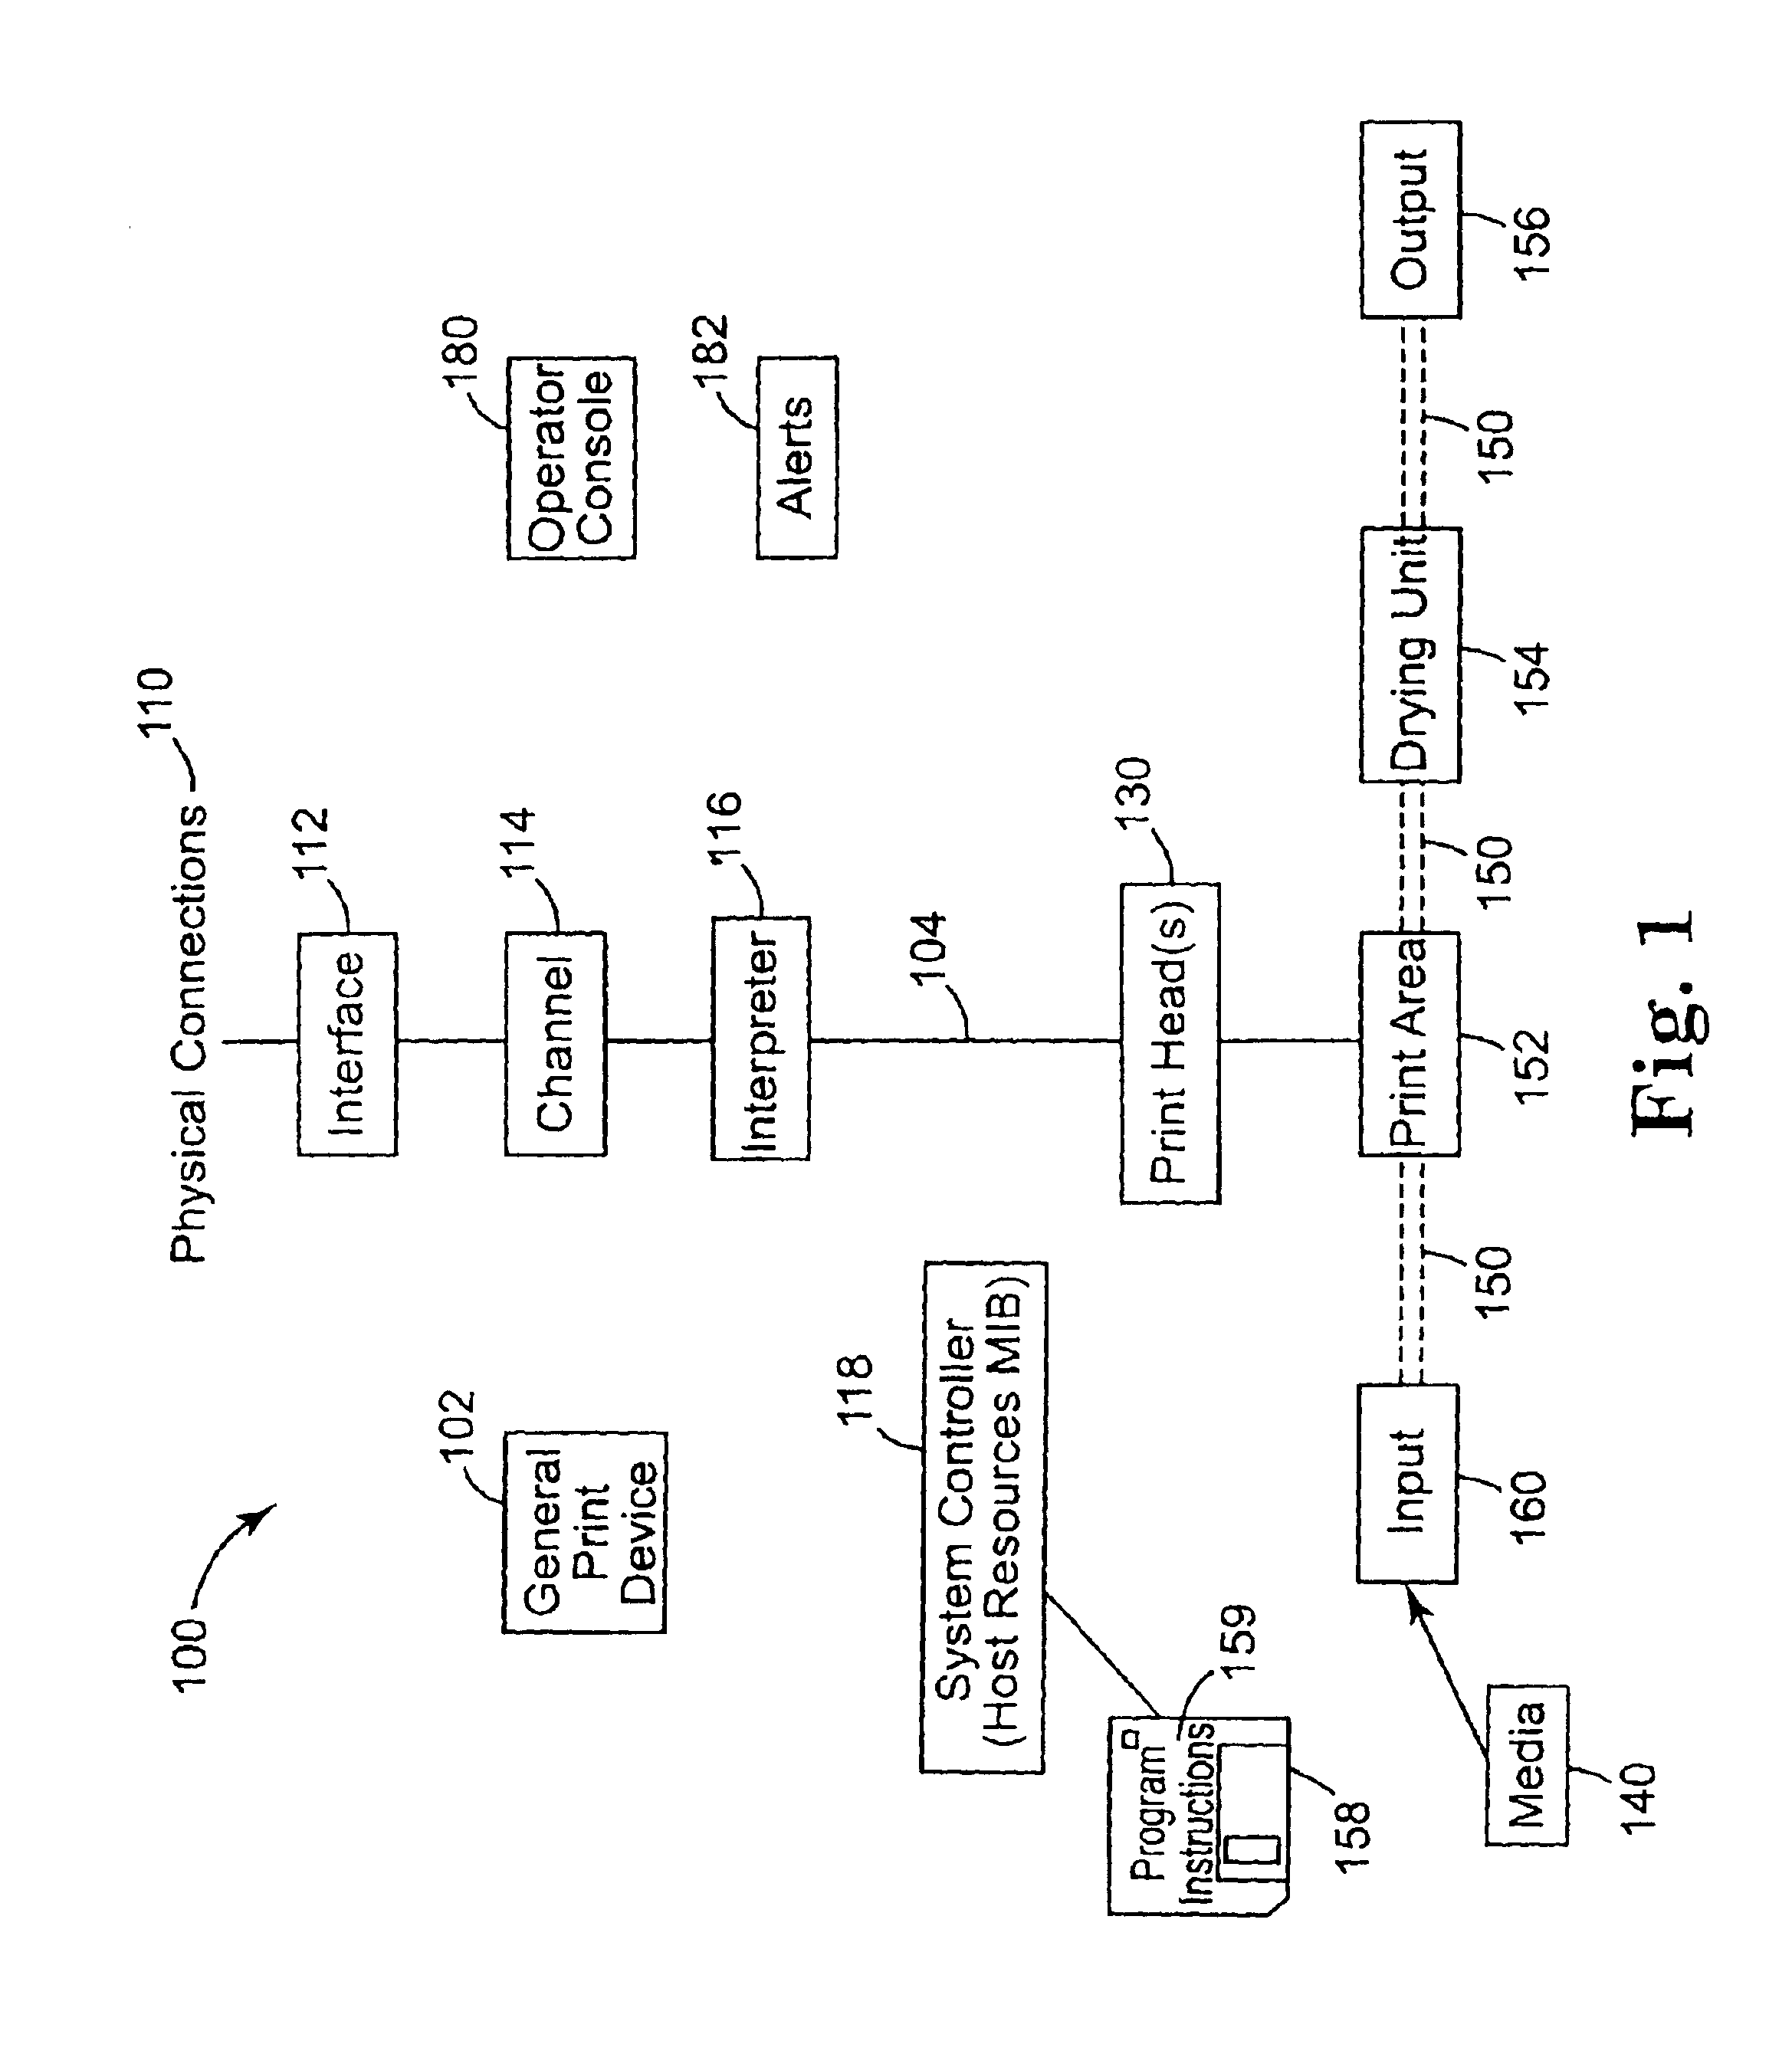 Method and apparatus for electromagnetic drying of printed media